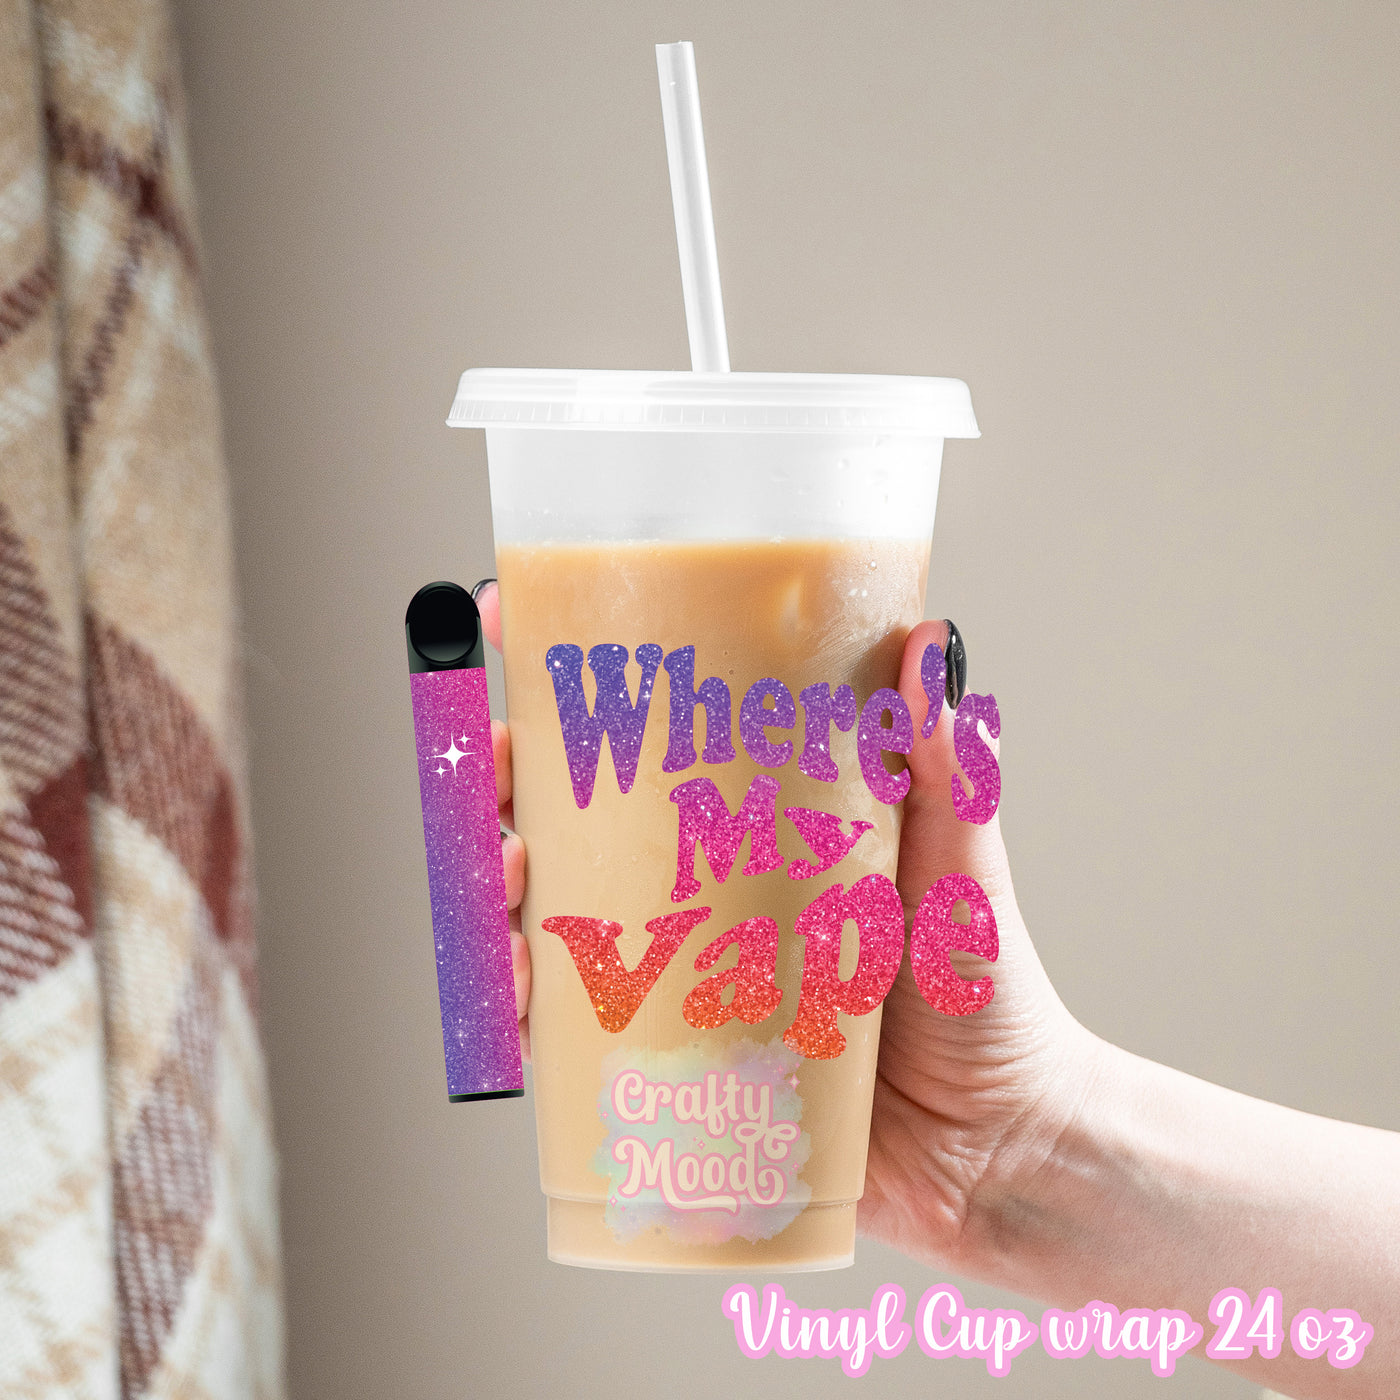 Where's my vape - 24oz Cold Cup Wrap Only